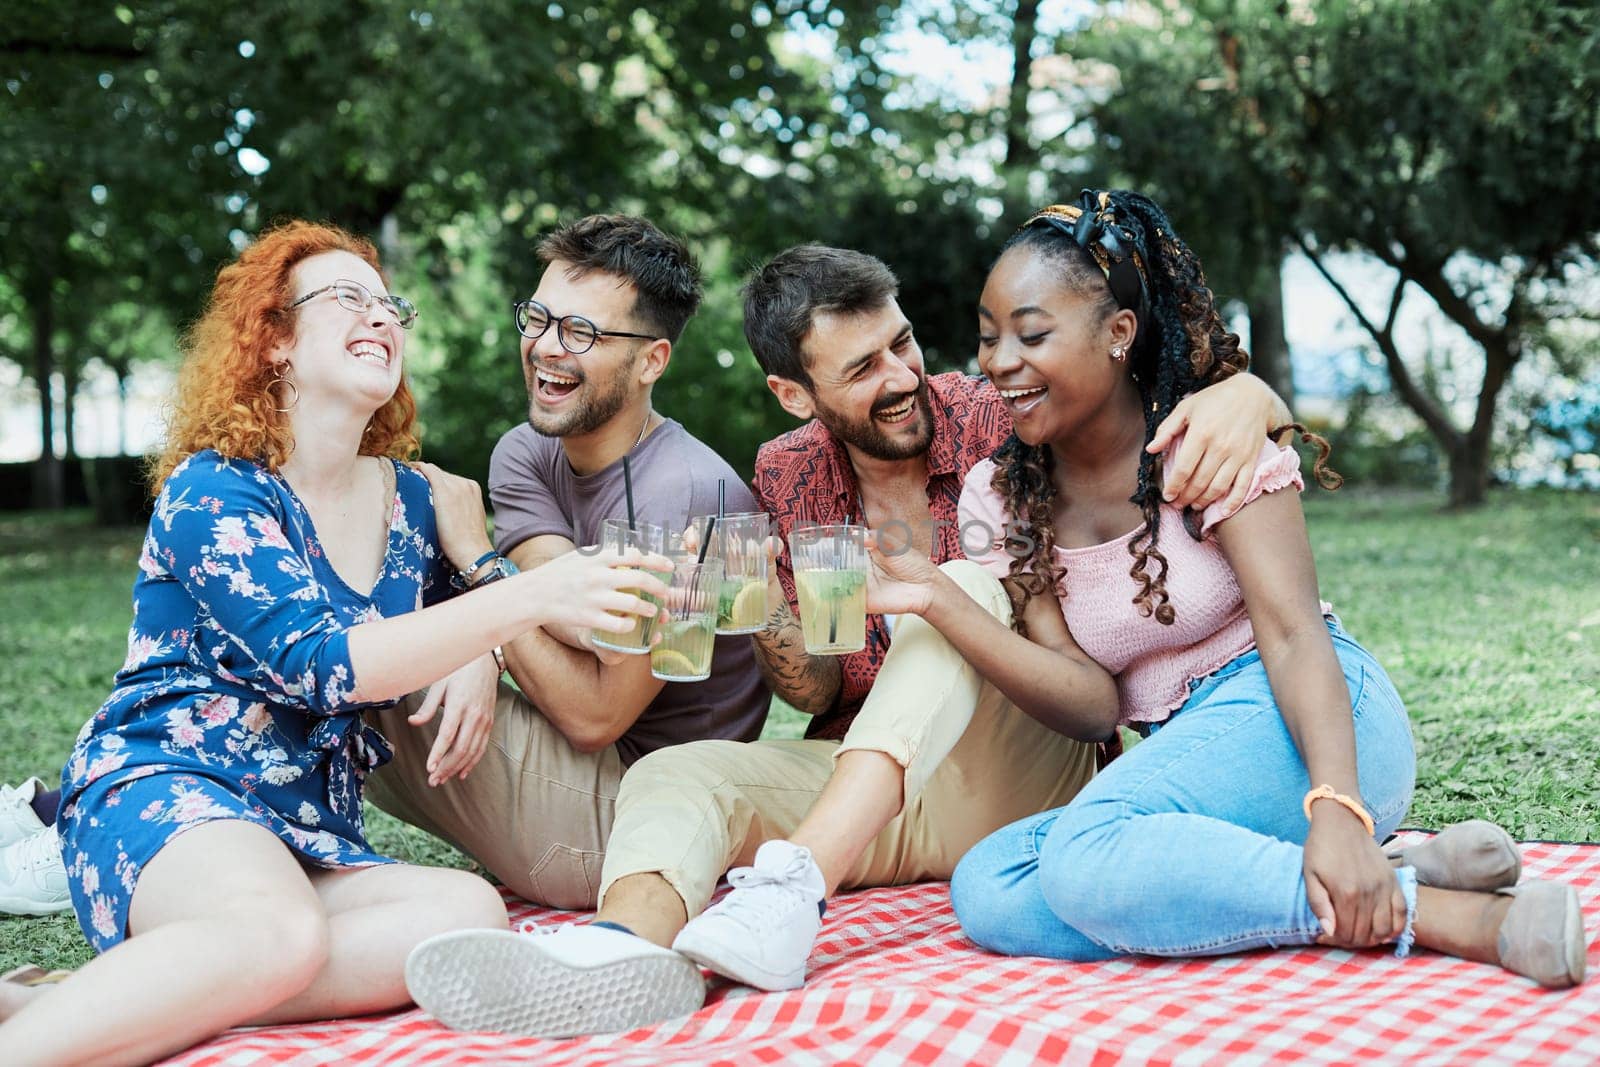 Group of happy young people having a picnic and having a toast with cocktail drinks, having fun together